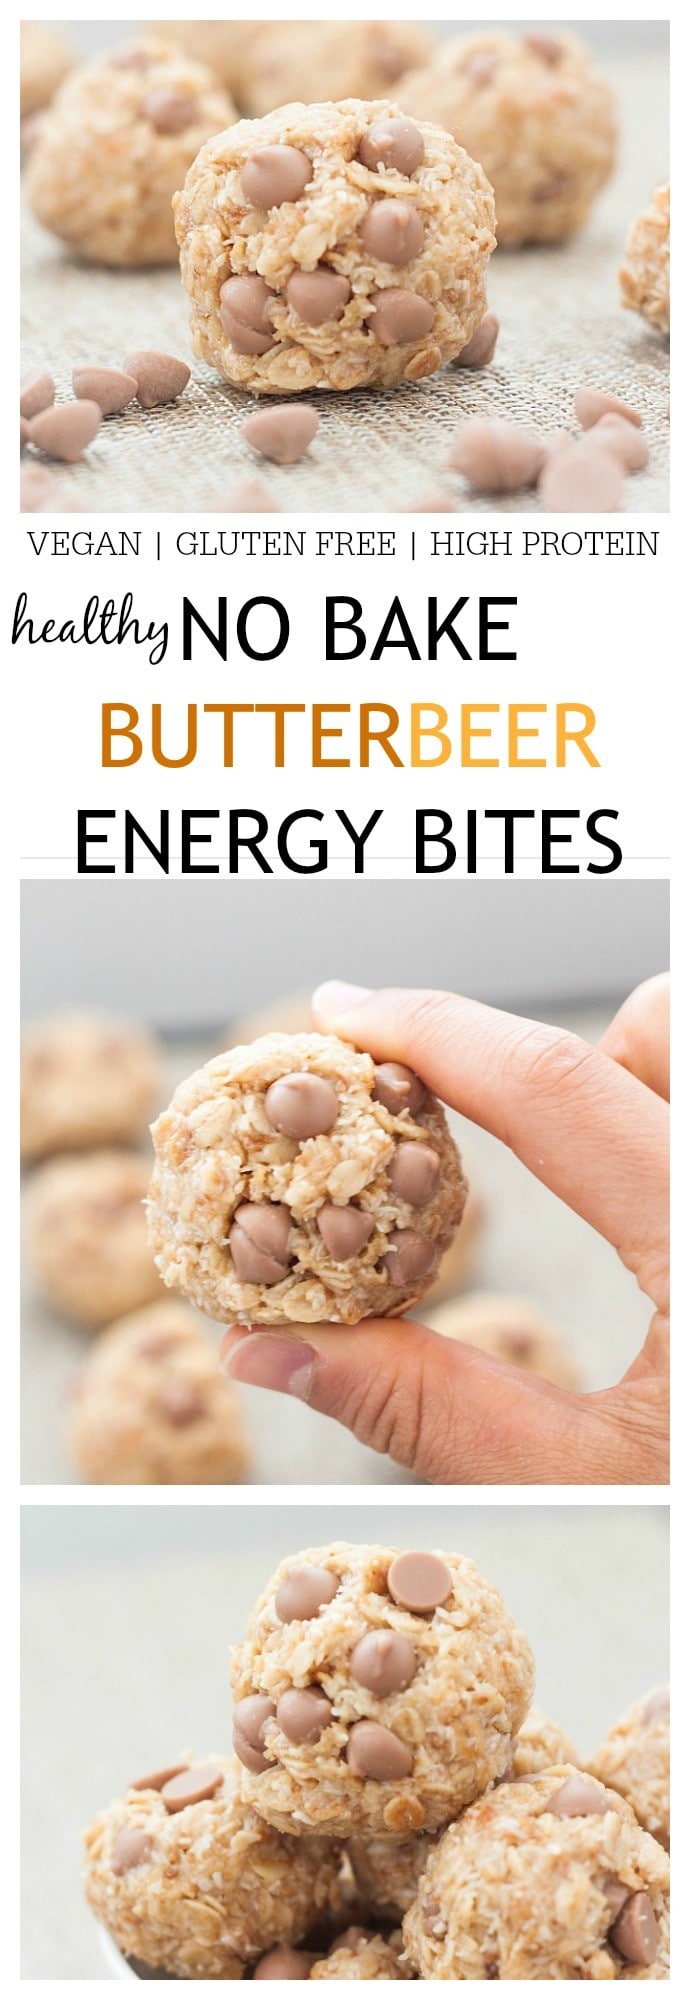 No Bake Butterbeer Energy Bites- A delicious, no bake snack sized treat which is perfect pre workout or a snack anytime throughout the day! Made in one bowl and ready in under 10 minutes, these are gluten free, vegan, refined sugar free, low in fat and very high in fiber- Inspired by the Harry Potter famed beverage butterbeer! @thebigmansworld - thebigmansworld.com